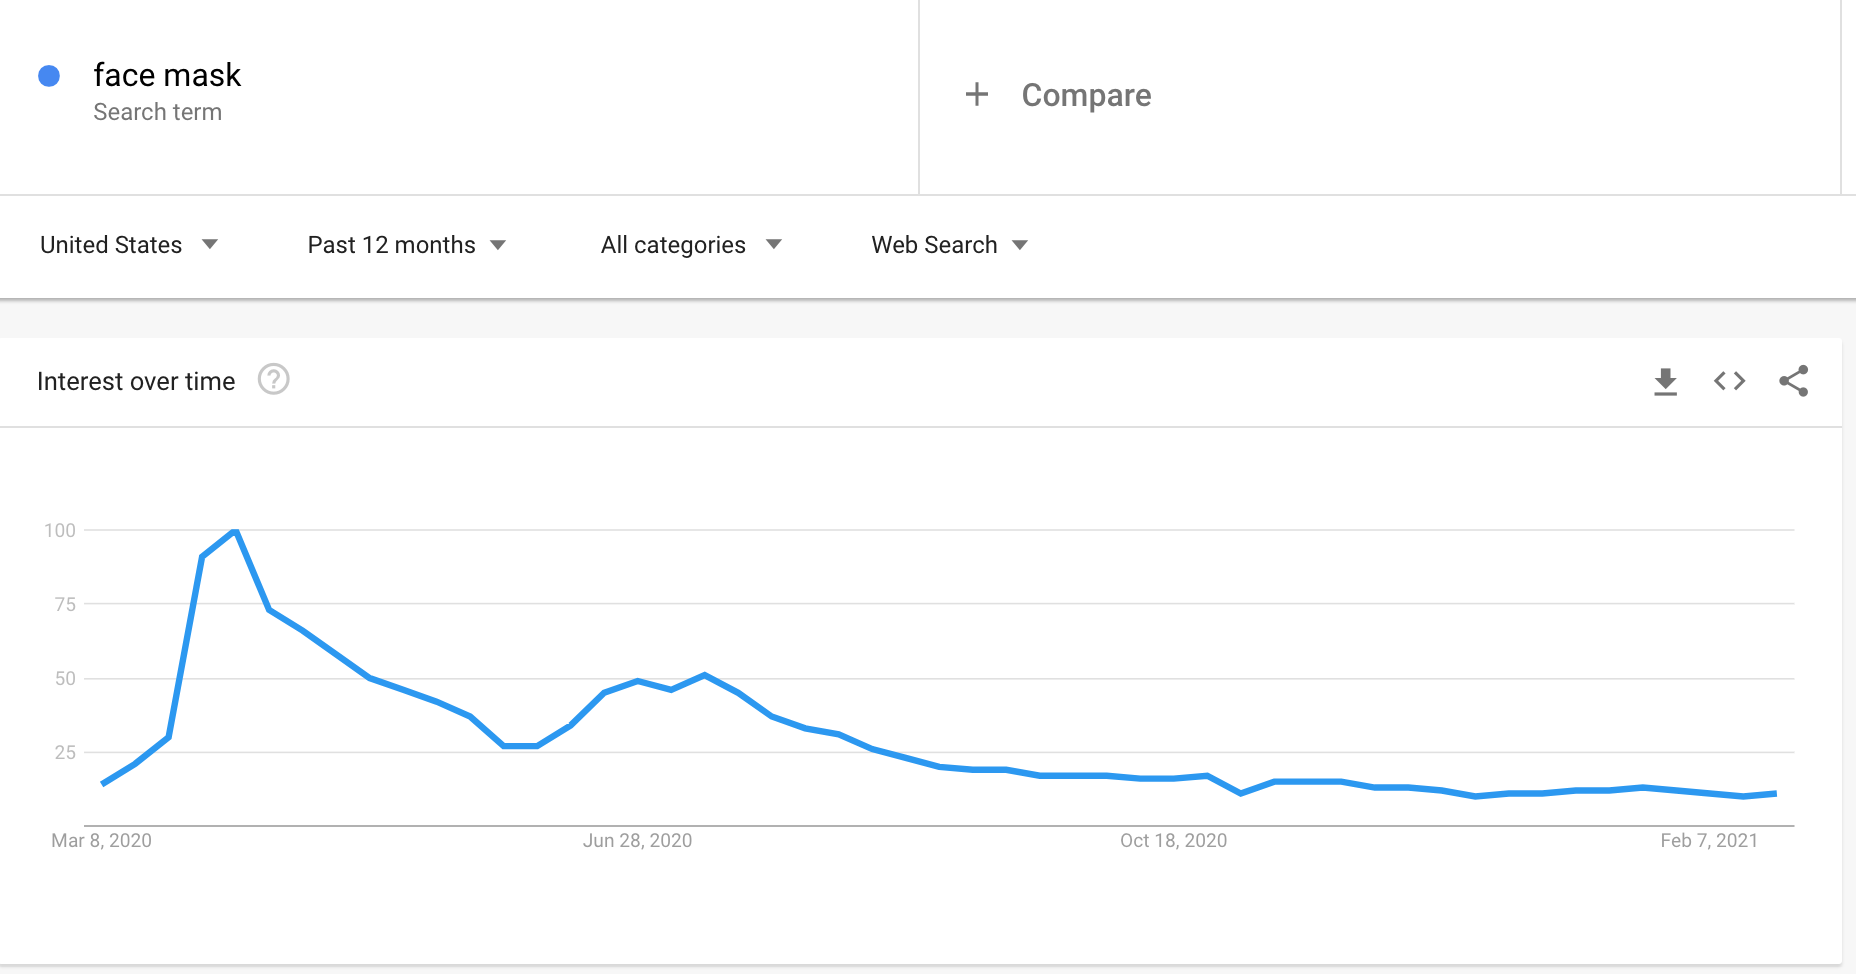 Google Trends graph showing the interest in face masks